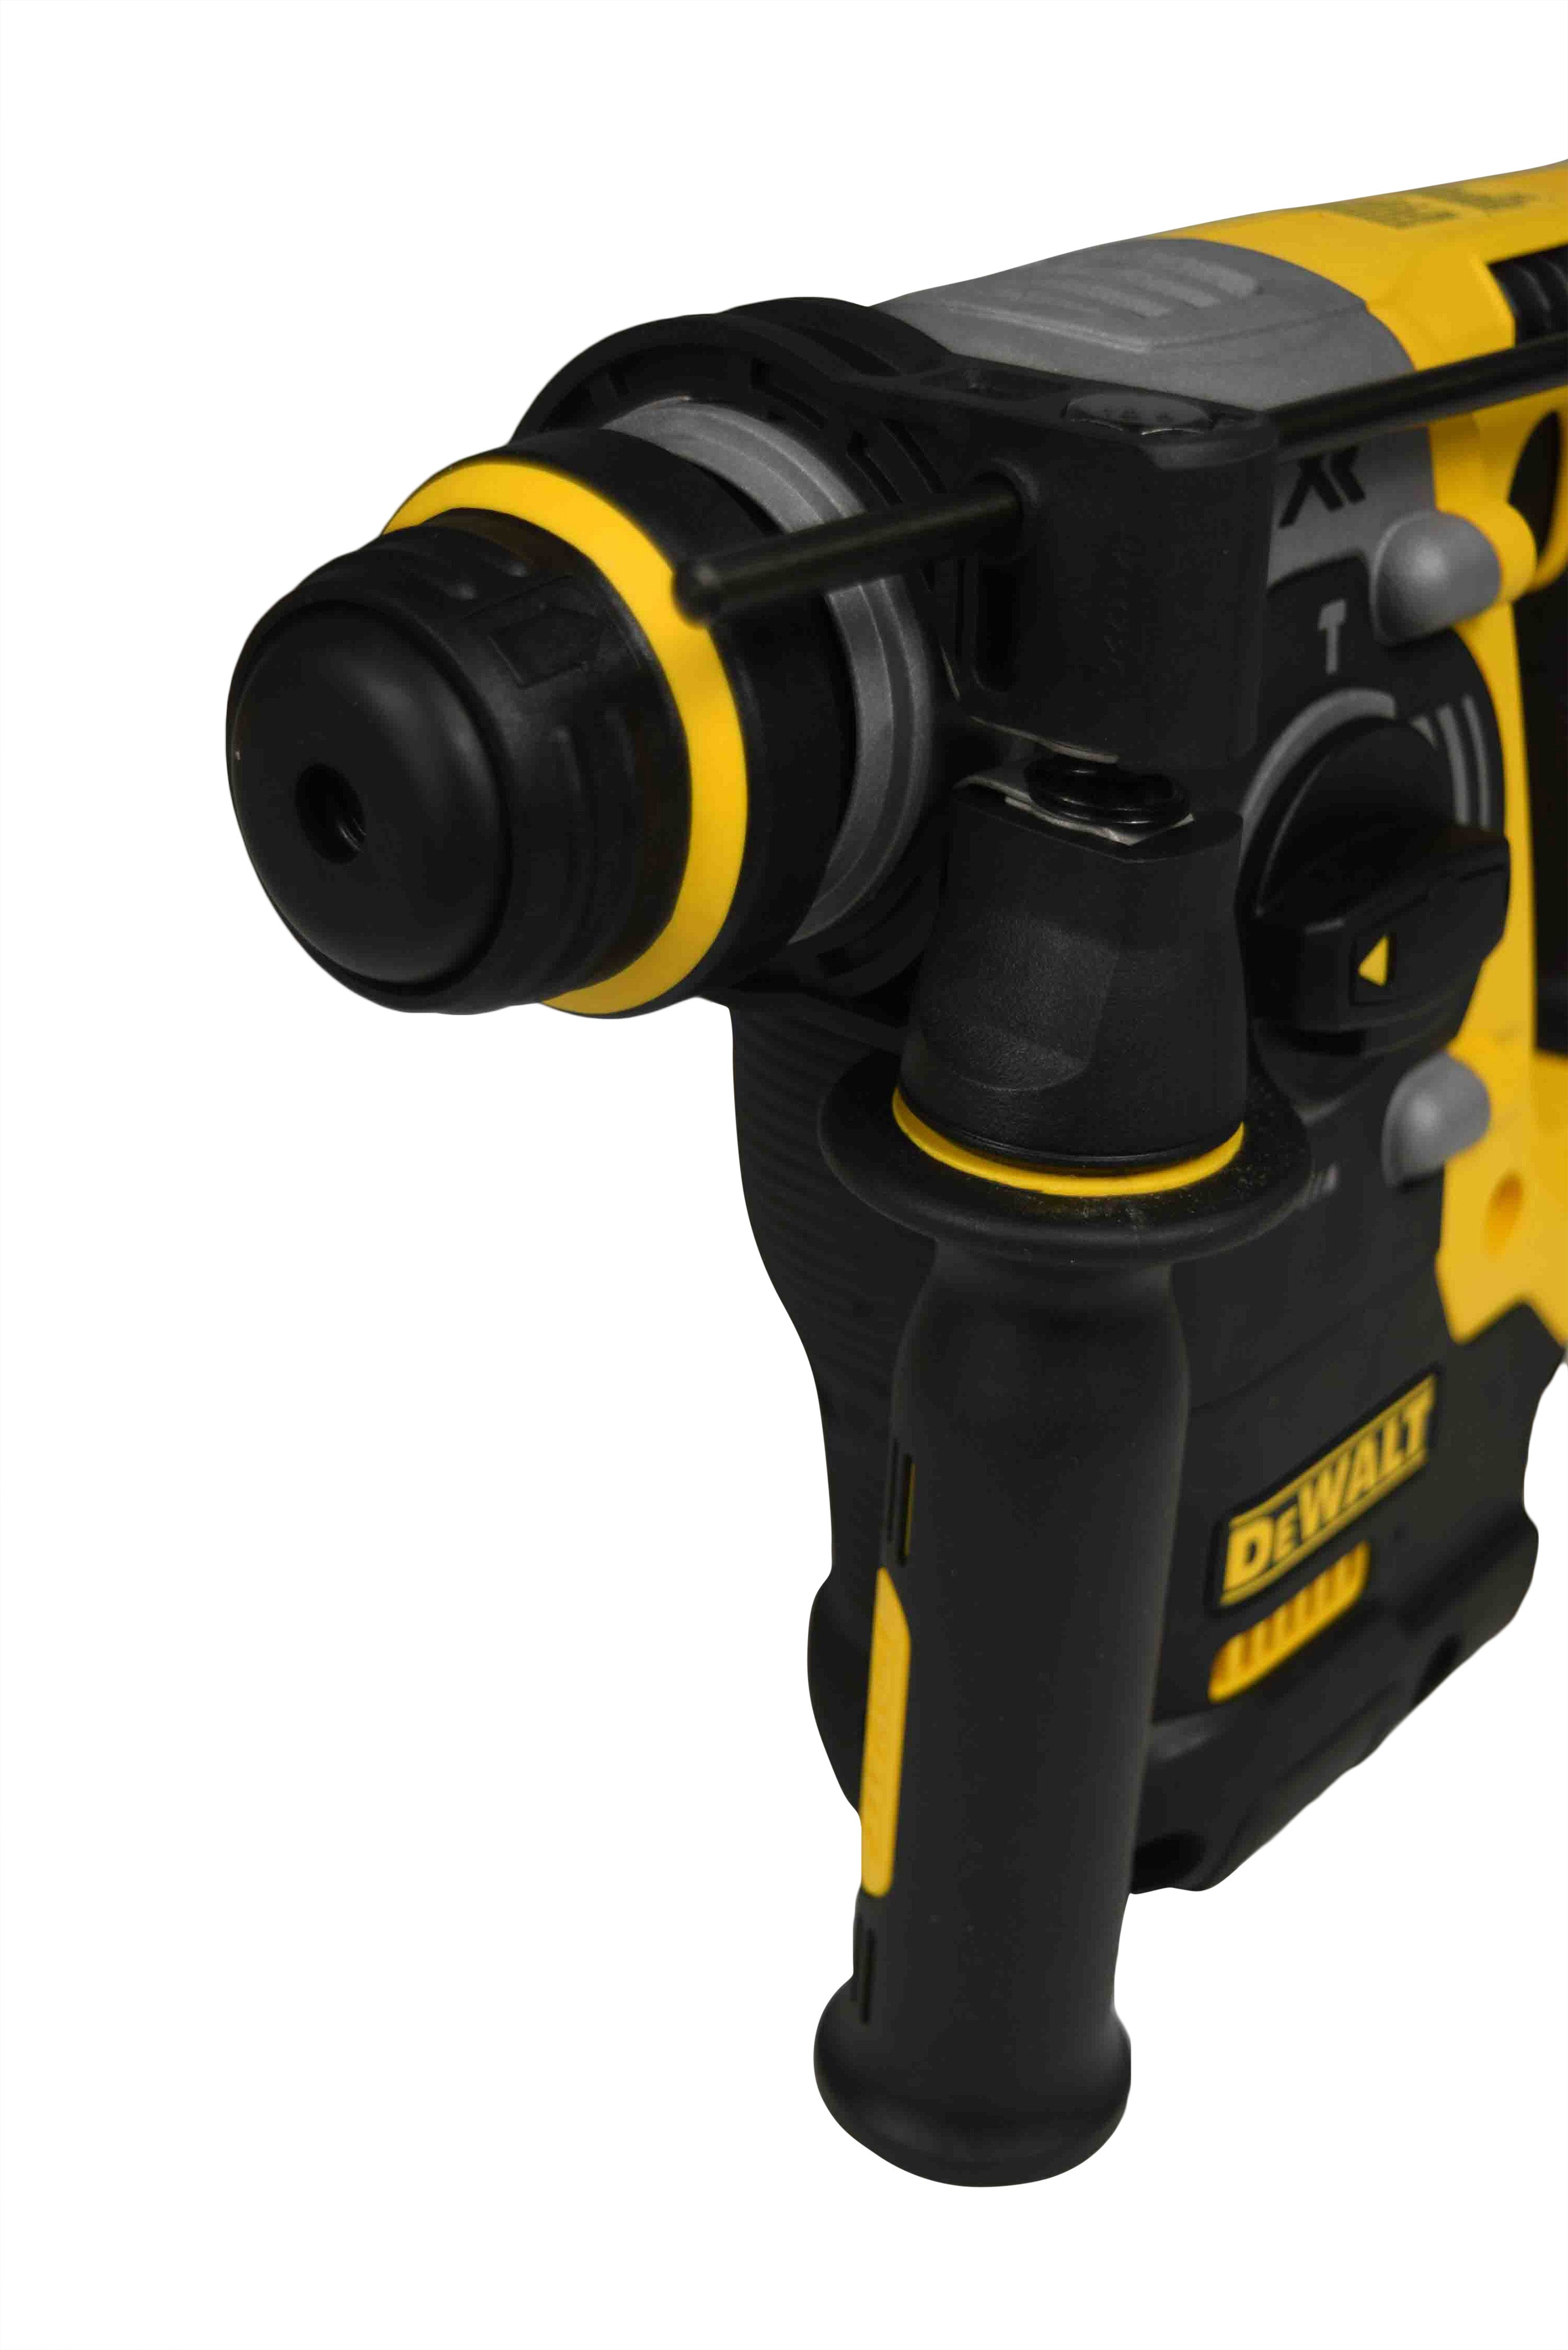 Dewalt-DCH273B-20V-MAX-Cordless-Lithium-Ion-Brushless-SDS-3-Mode-1-in.-Rotary-Hammer-Bare-Tool-image-6